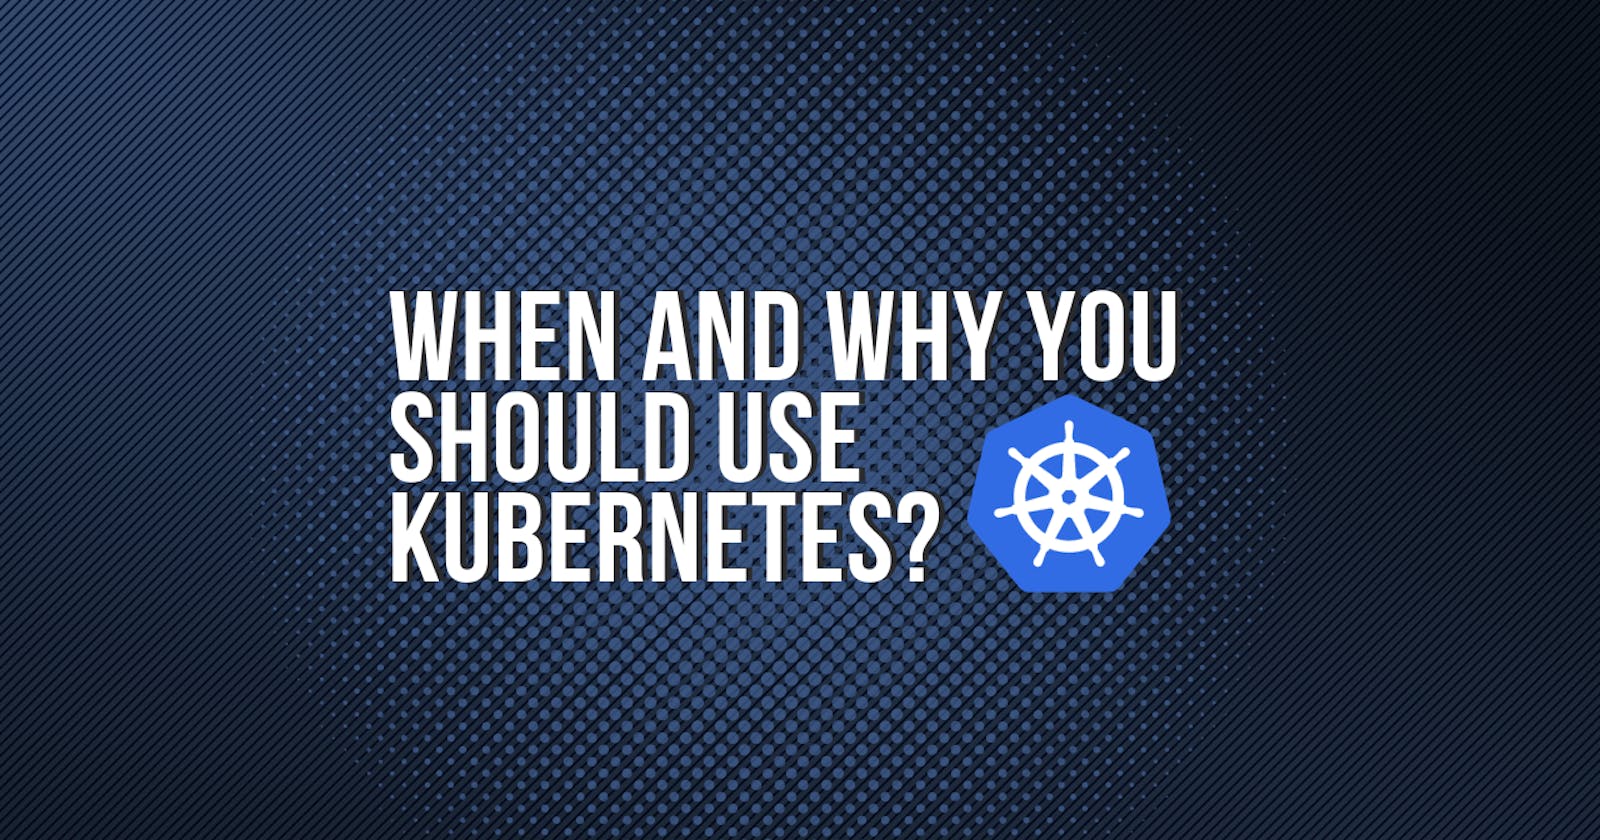 When and why you should use Kubernetes?